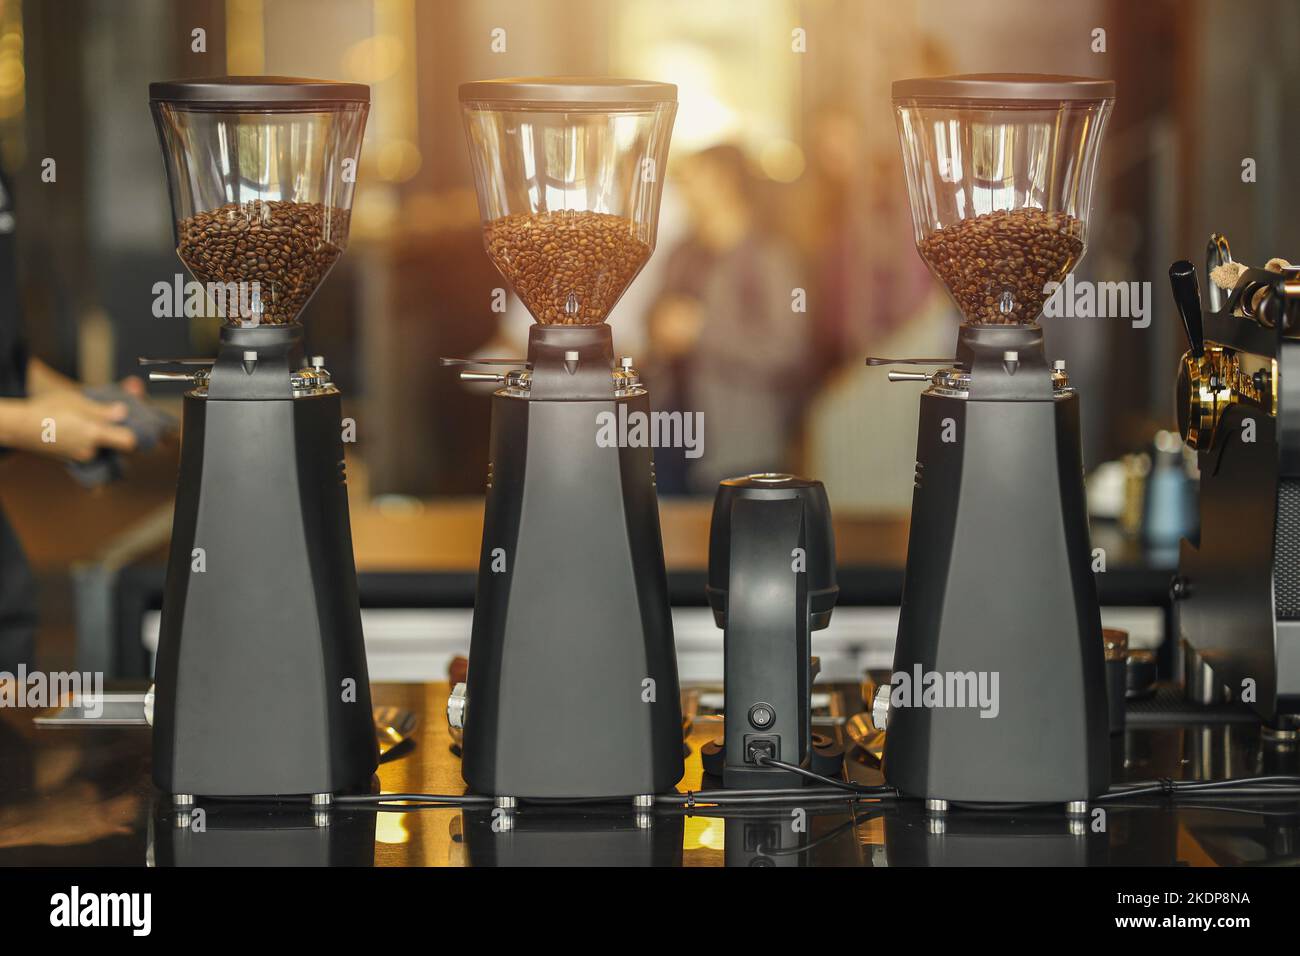 multiple coffee grinder machine for each type of coffee bean in specialty coffee cafe business Stock Photo